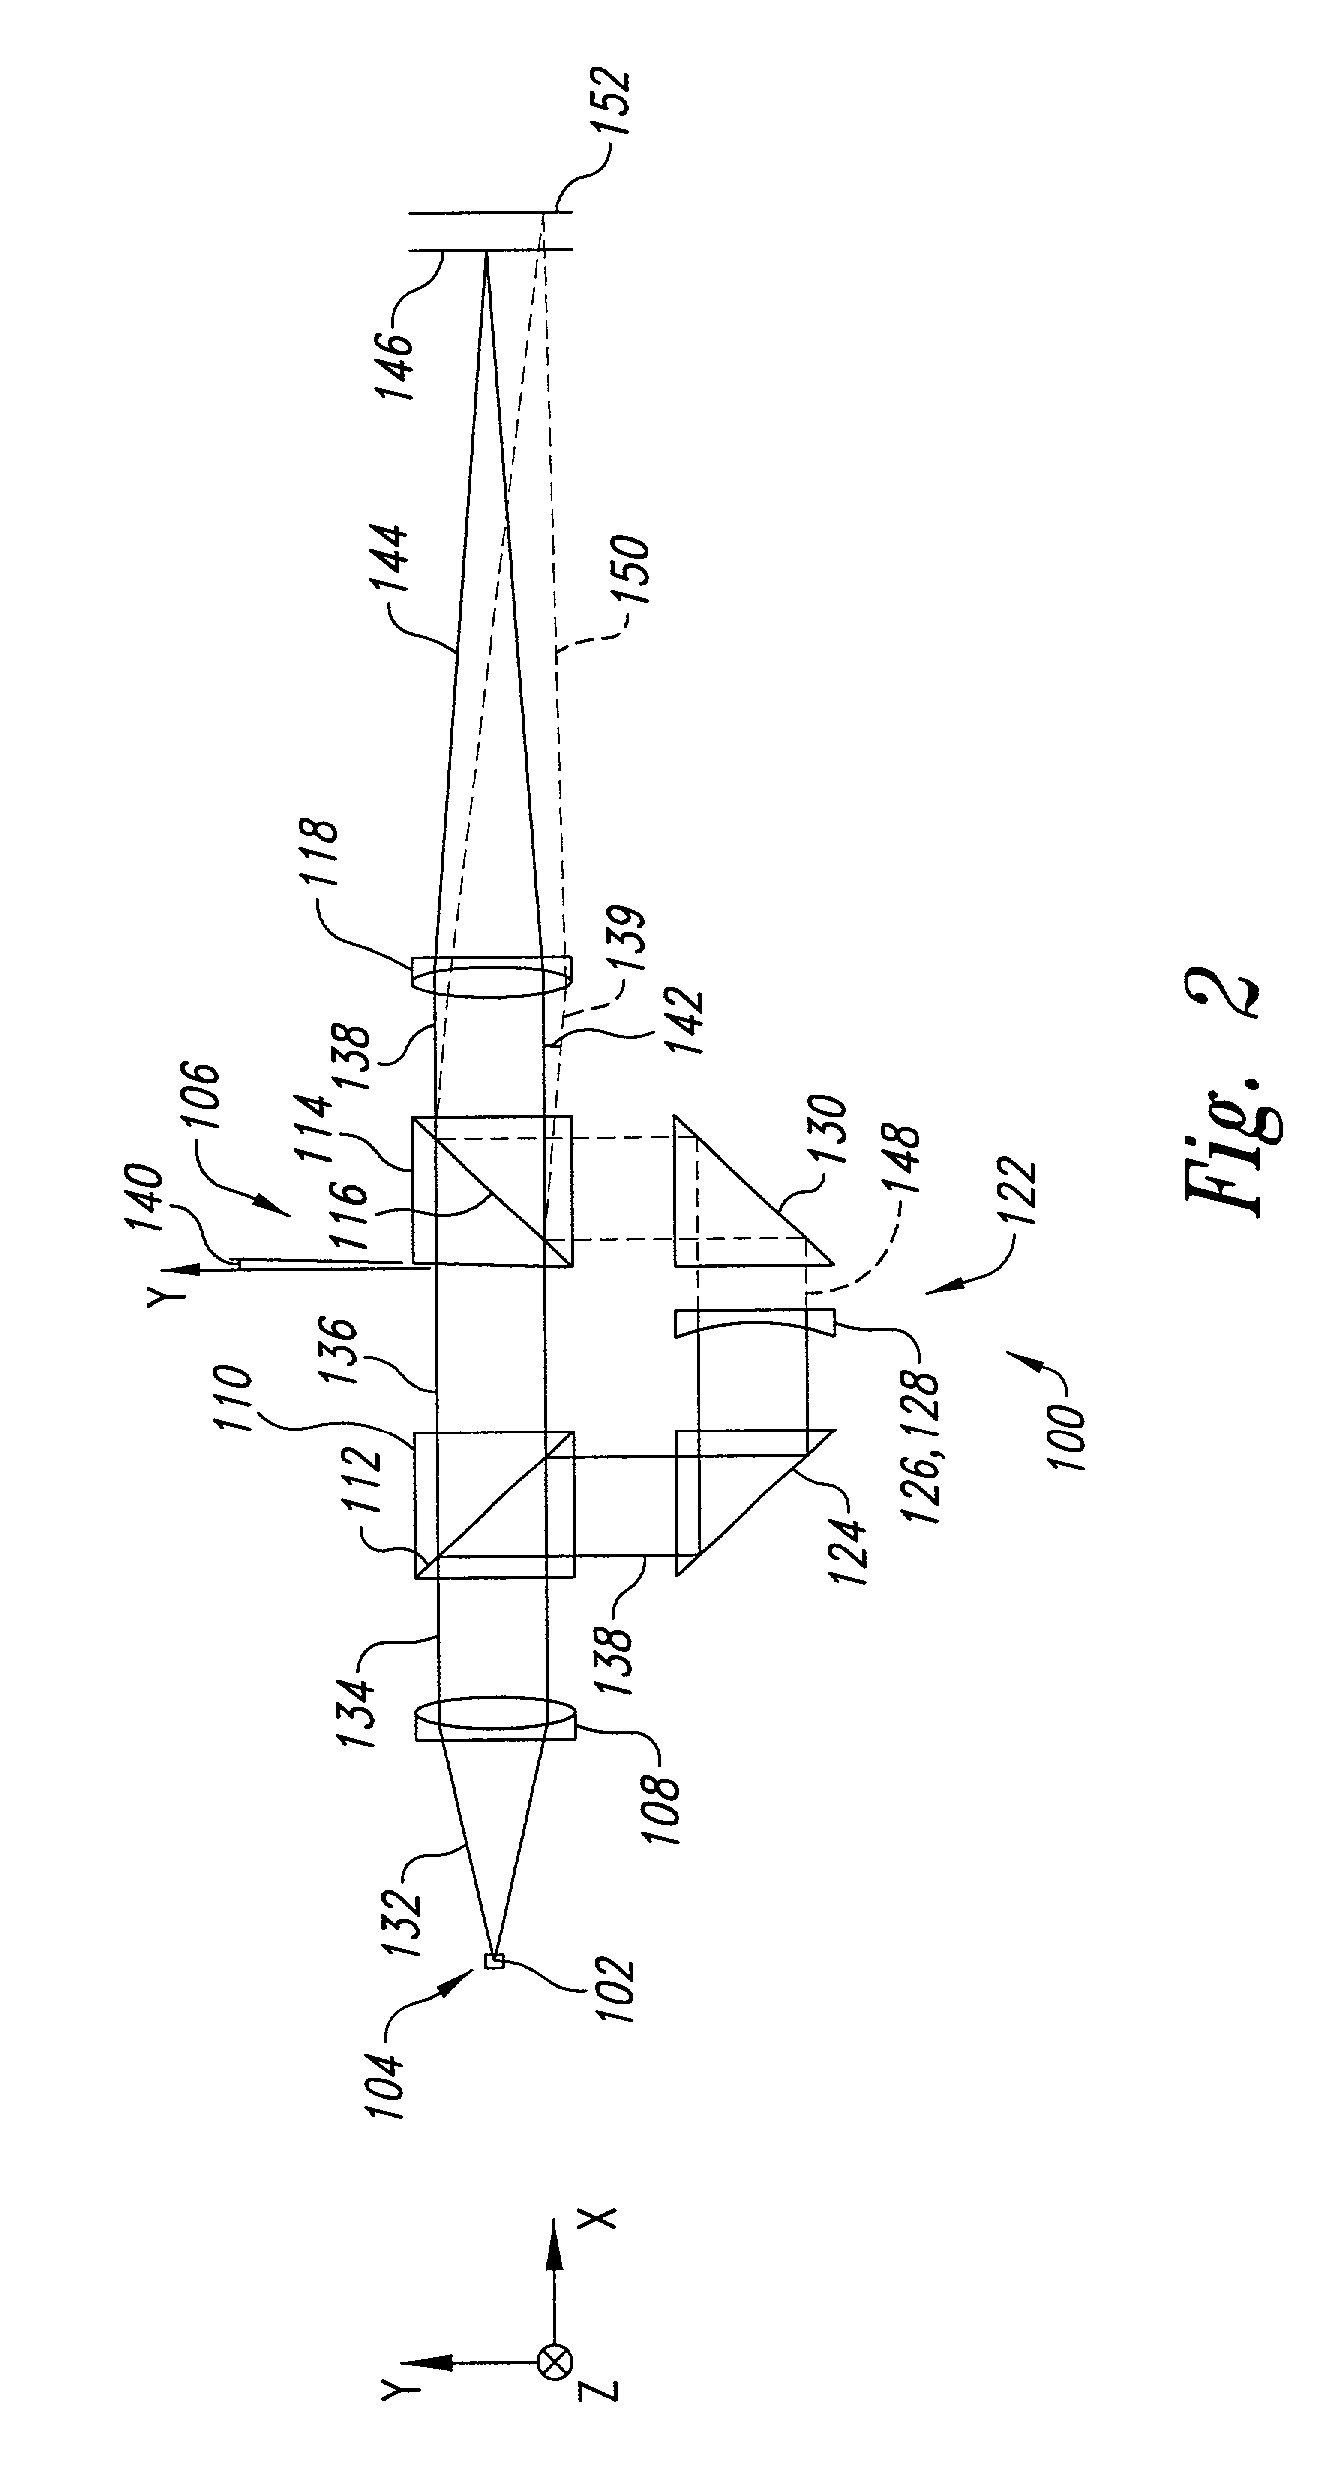 System and method for high numeric aperture imaging systems